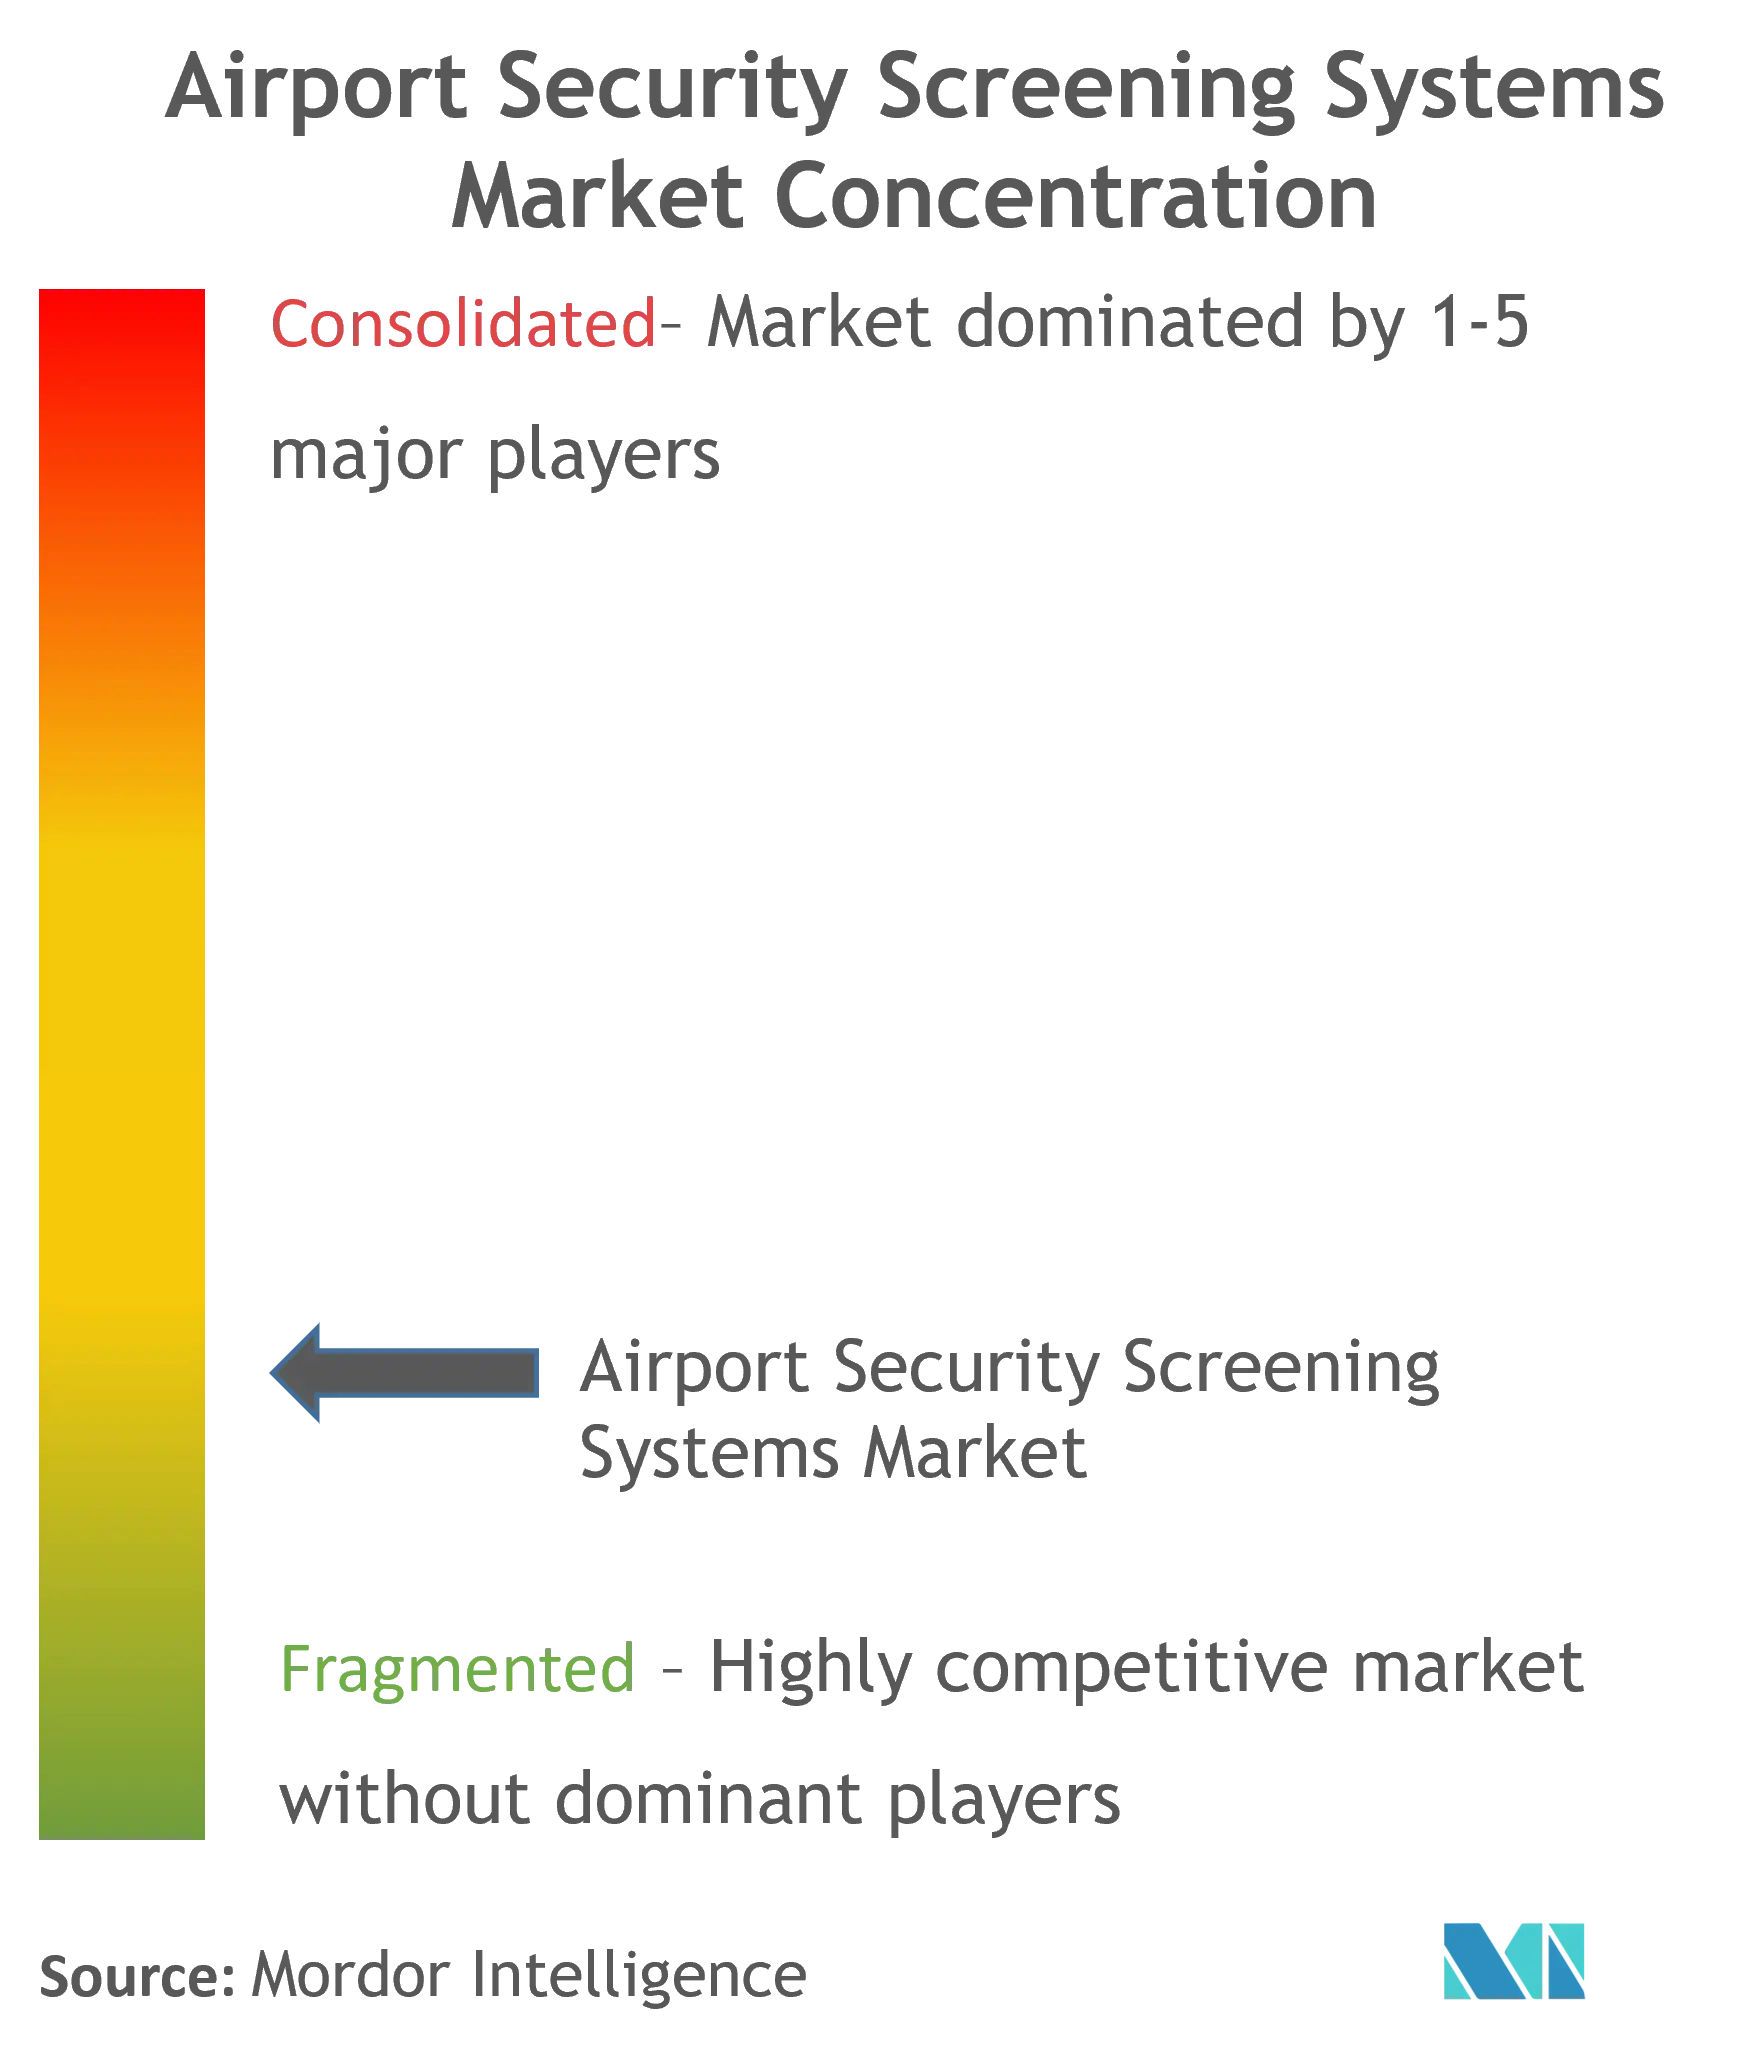 Airport Security Screening Systems Market Concentration